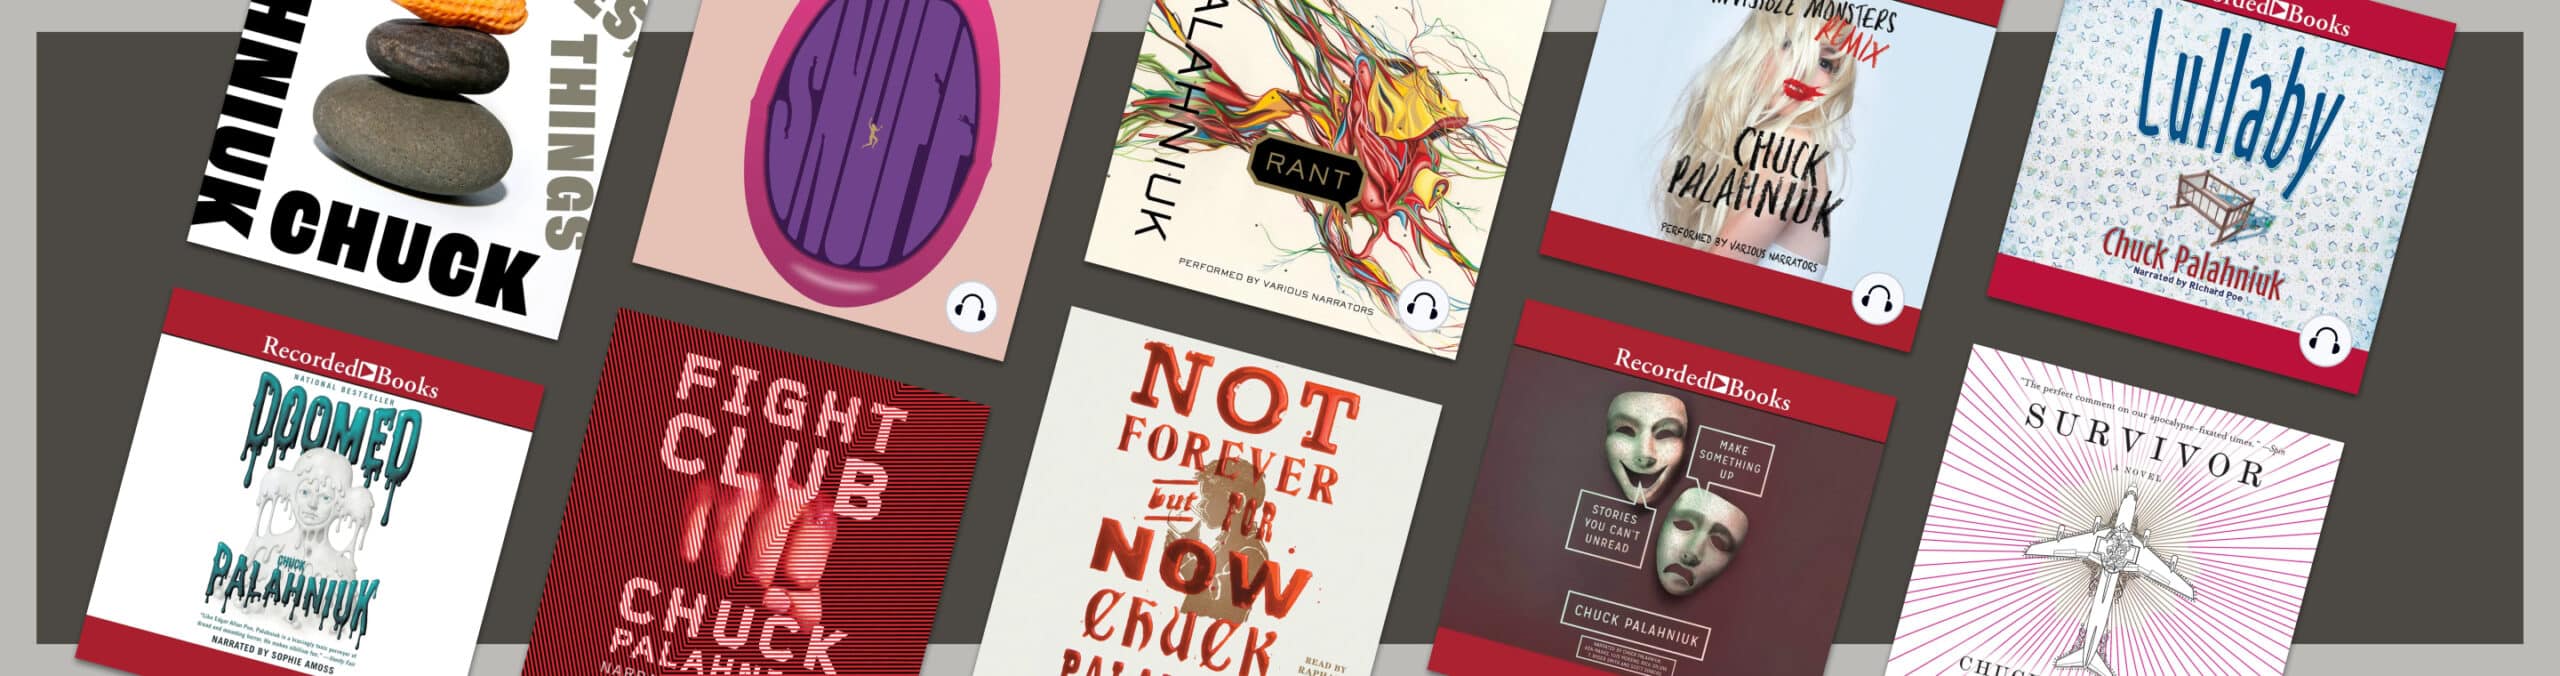 16 of the best Chuck Palahniuk books, ranked